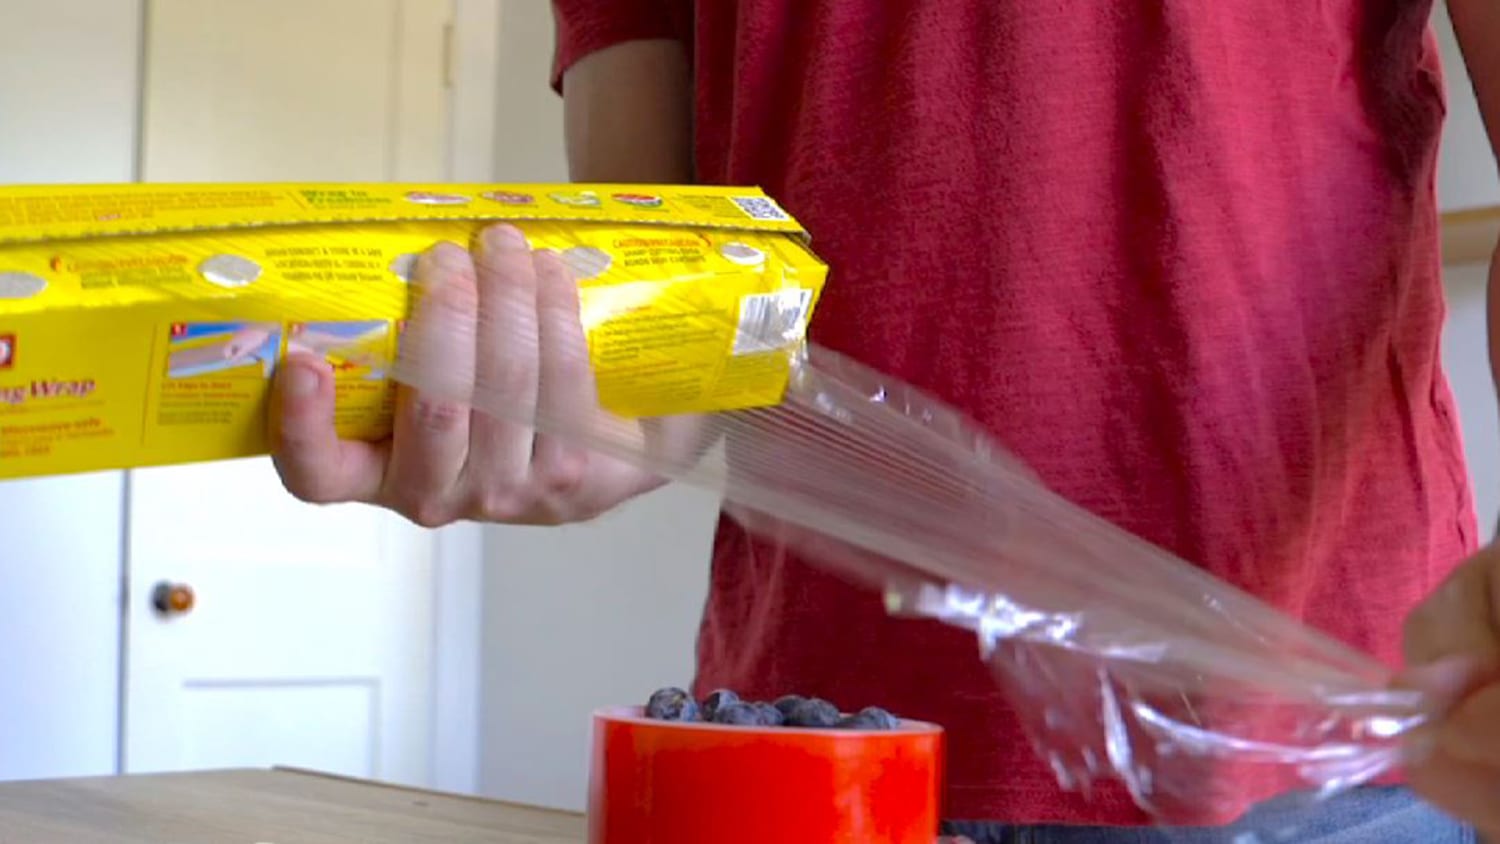 Hate pulling out plastic wrap? This 1 tip will change that